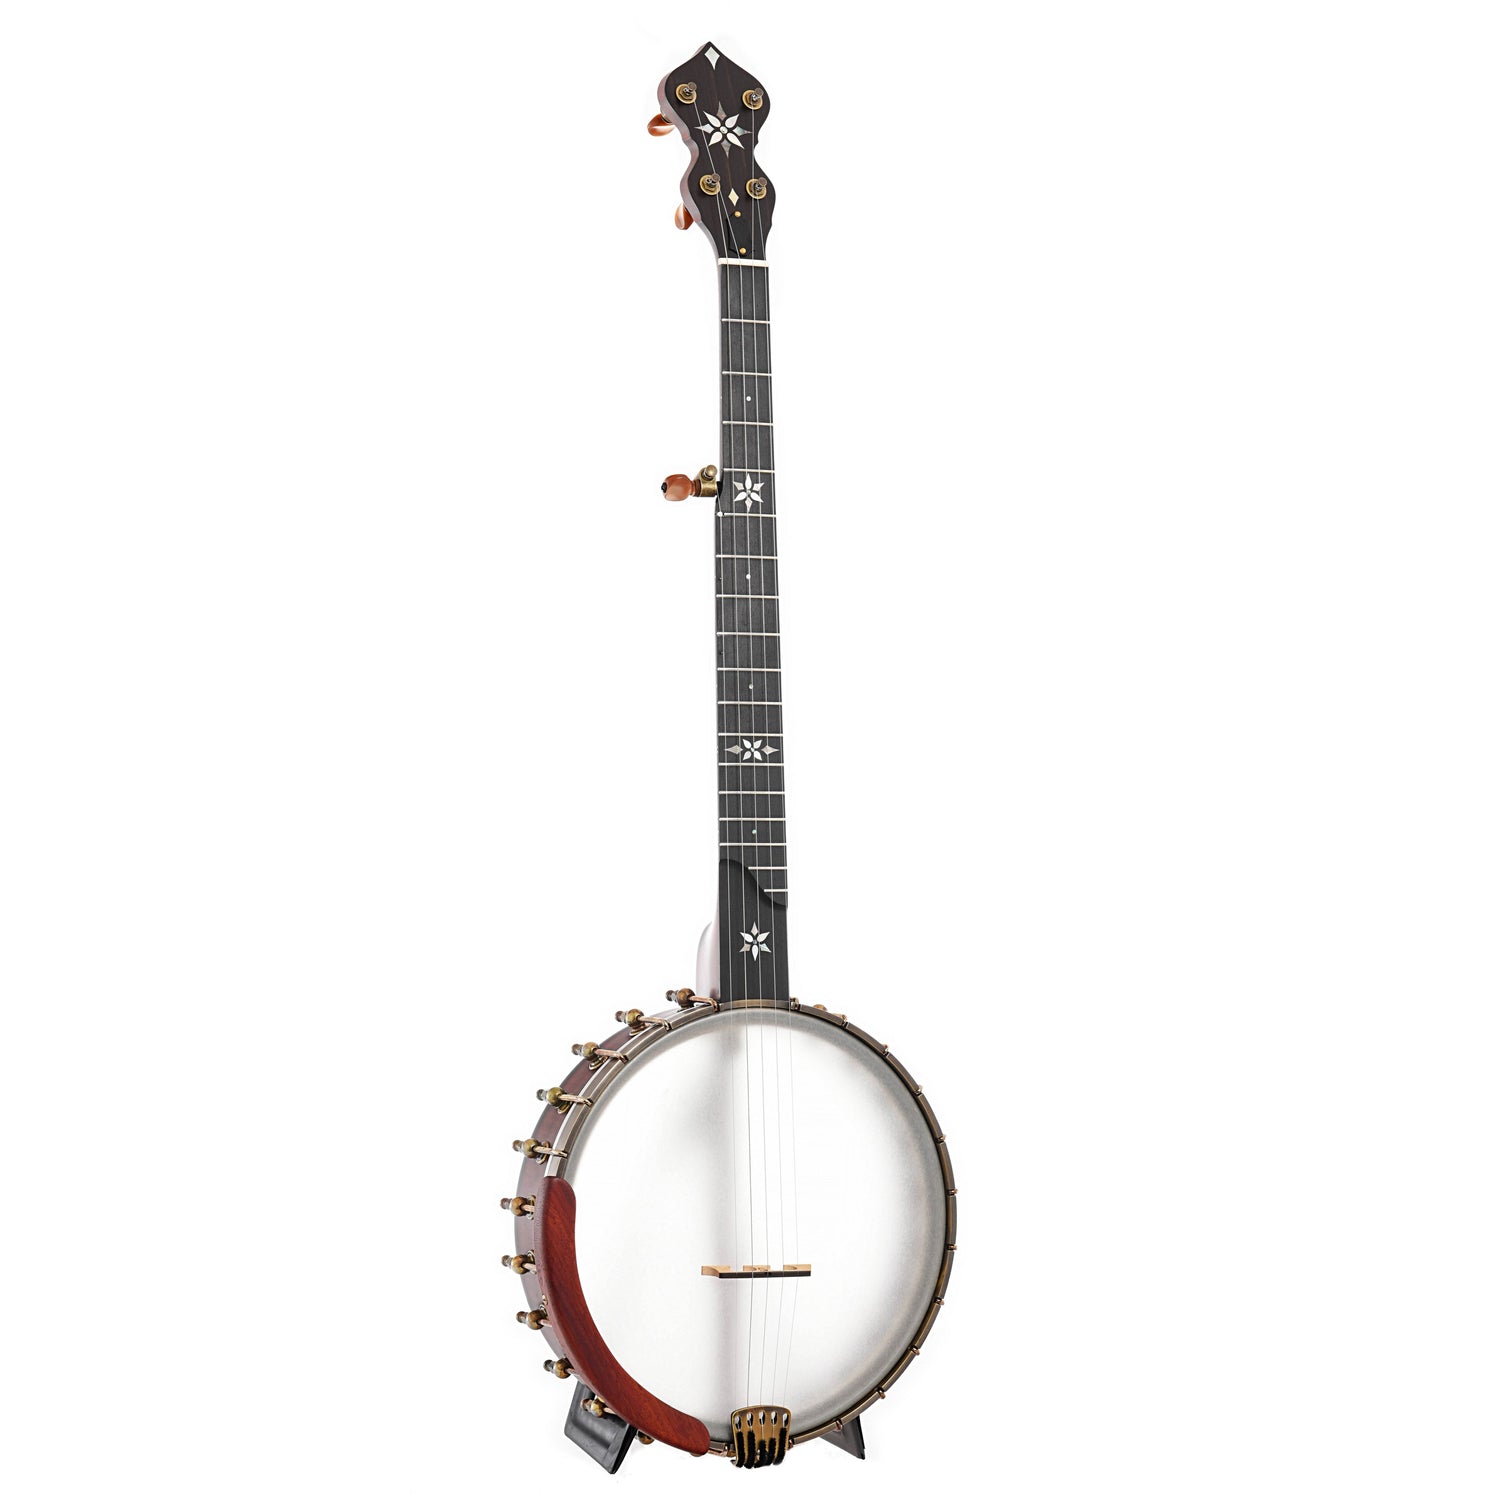 Full front and side of  Ome Mira 11" Openback Banjo, Curly Maple, Tubaphone Tone Ring